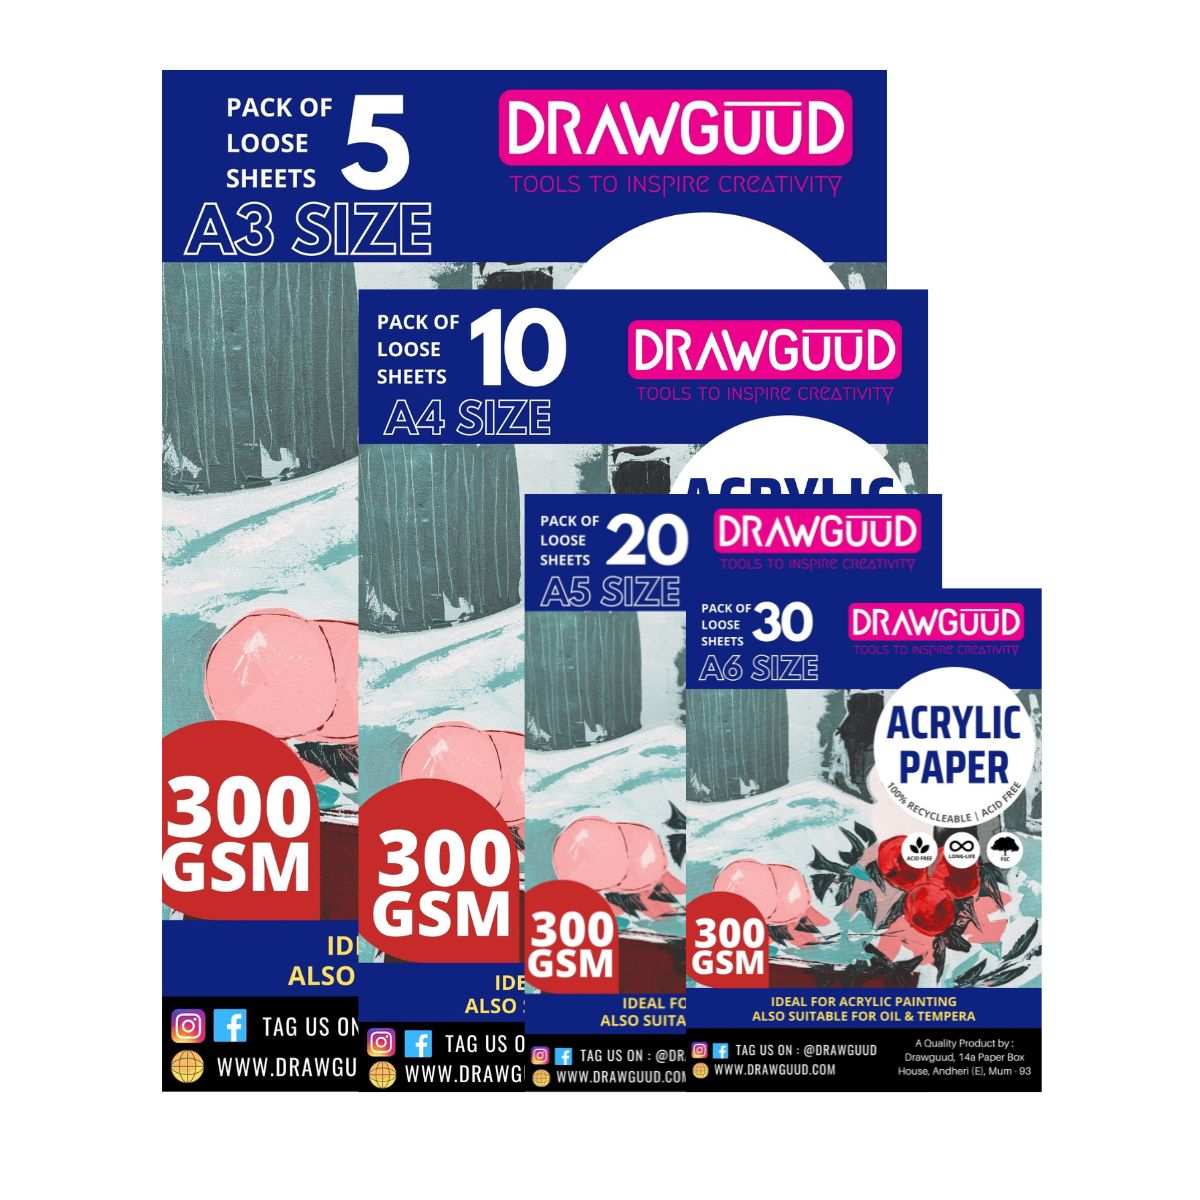 DRAWGUUD CANVAS TEXTURED PAPER 300 GSM SHEETS WIRO BOOK,WHITE – DRAWGUUD -  TOOLS TO INSPIRE CREATIVITY